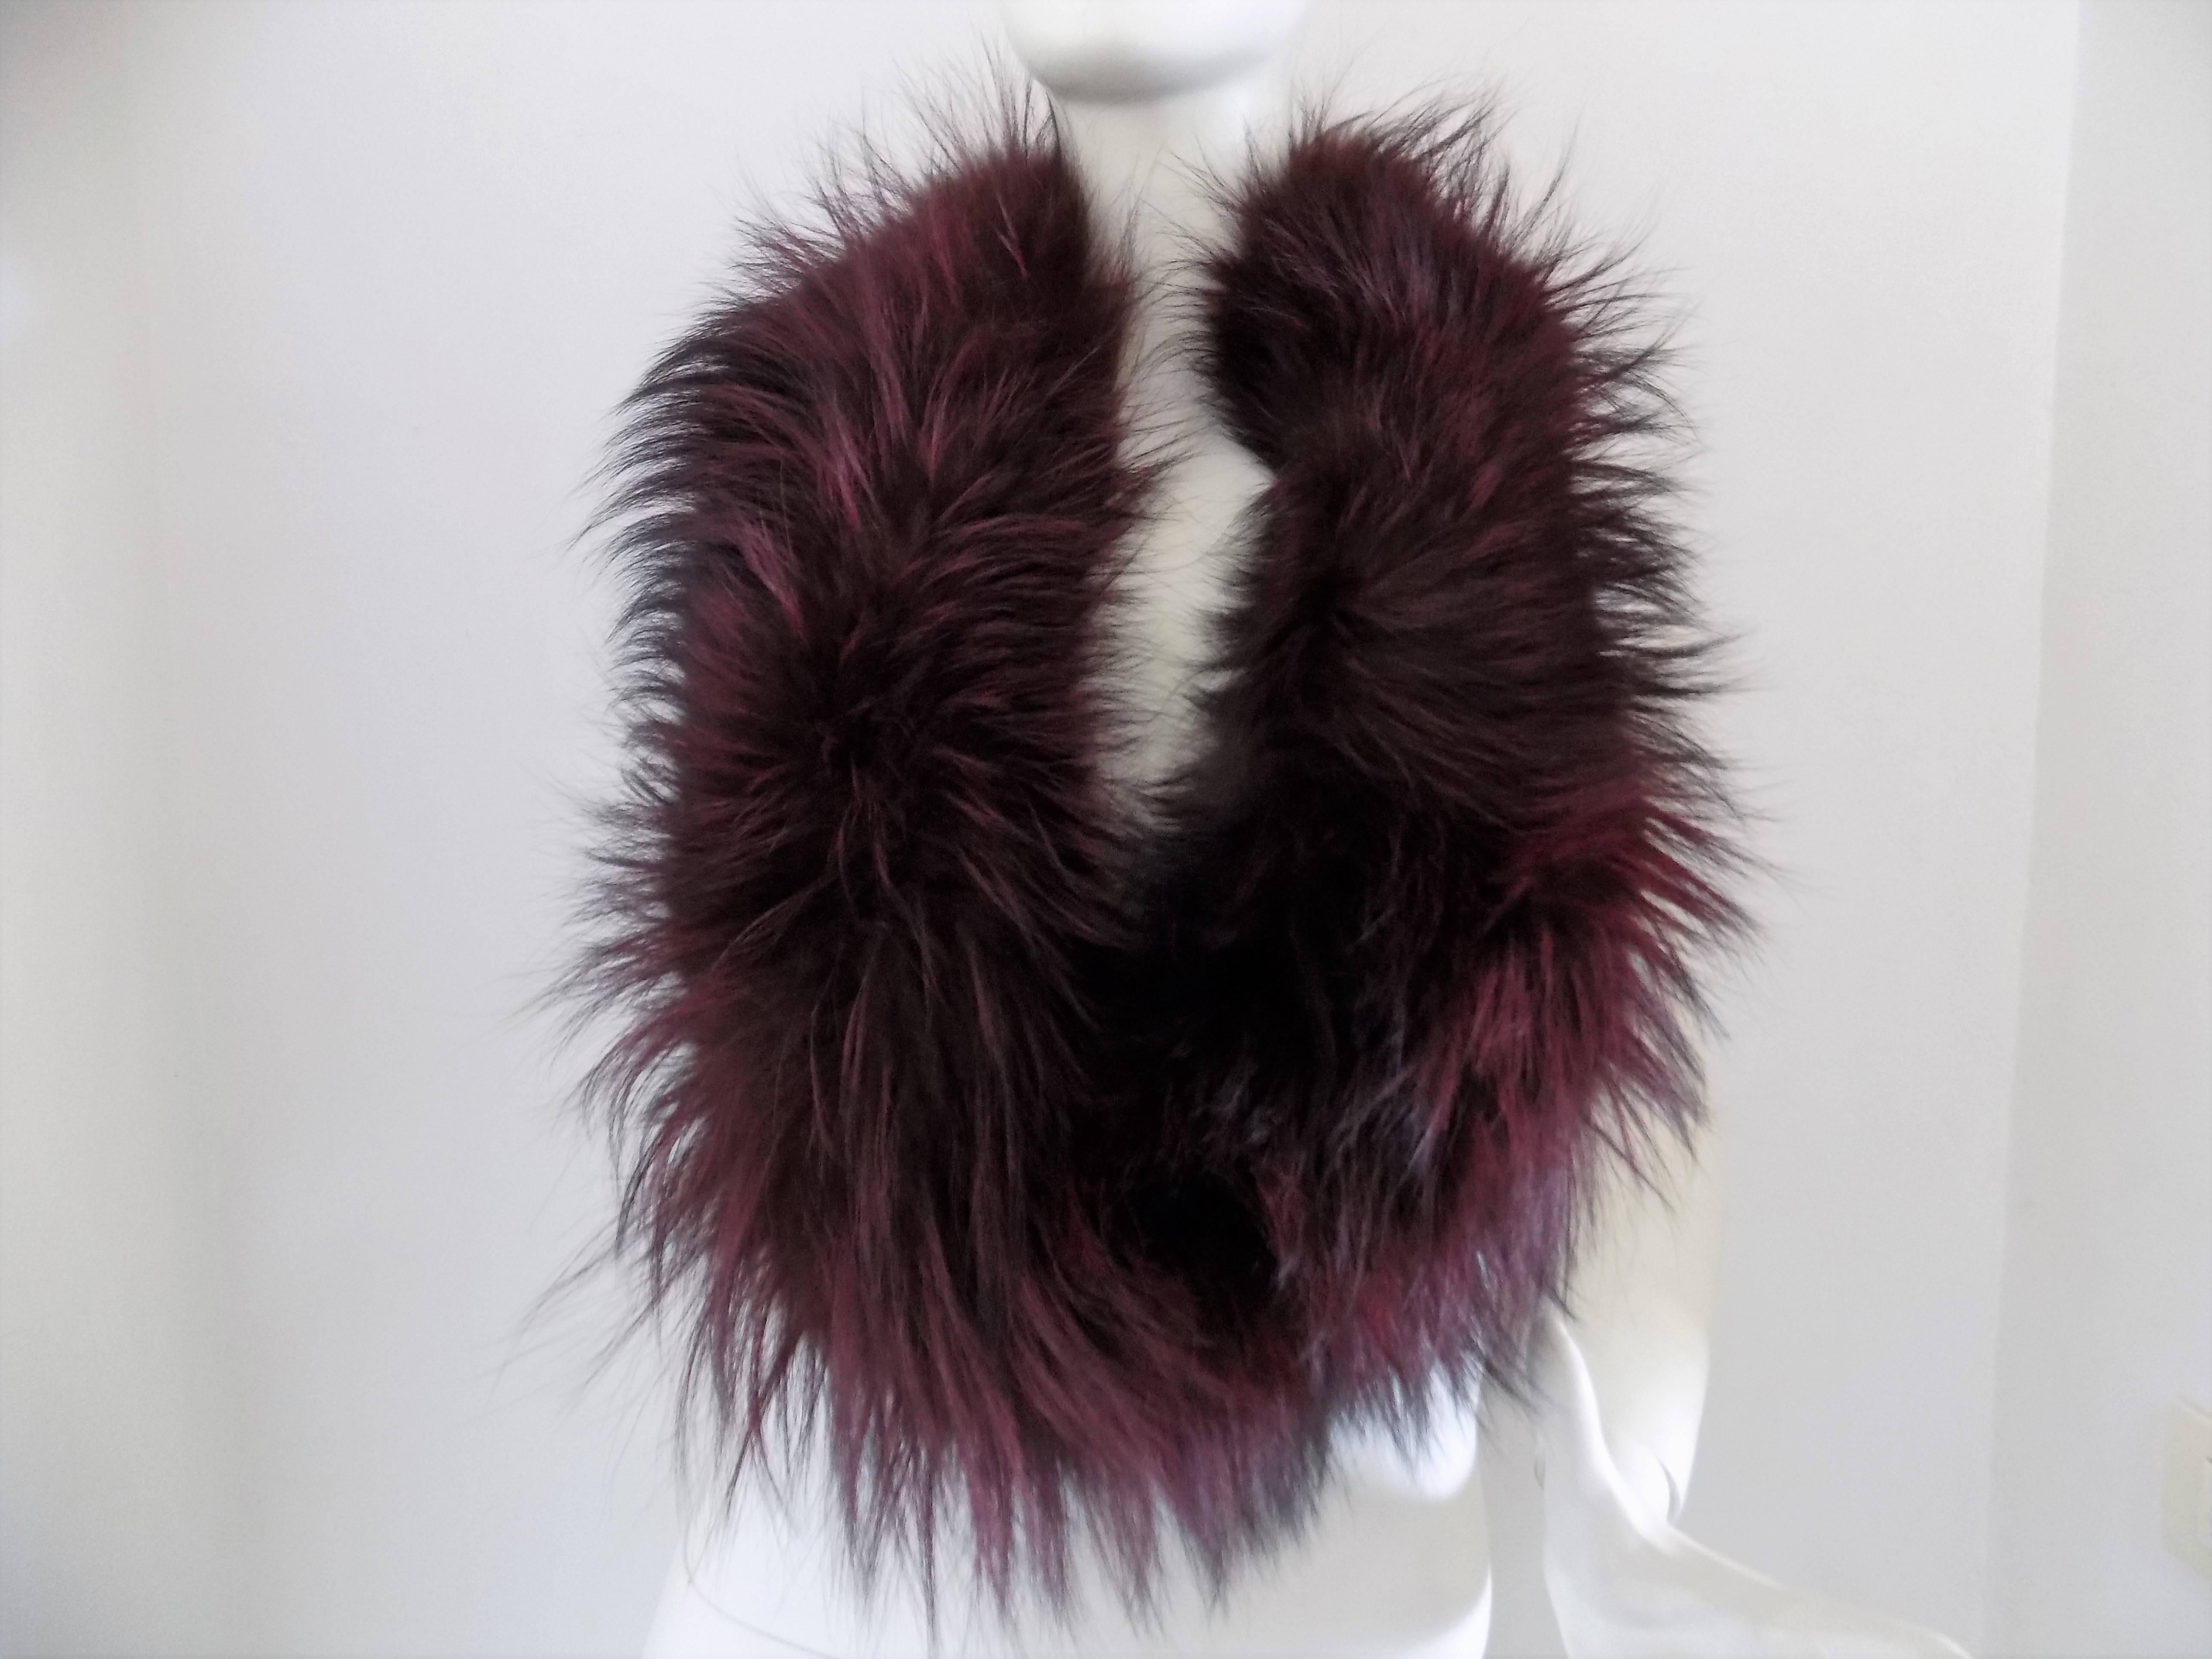 Gucci real fur Scarf
Totally made in italy
can be sold separetely or together with hat and muffs check out other listings